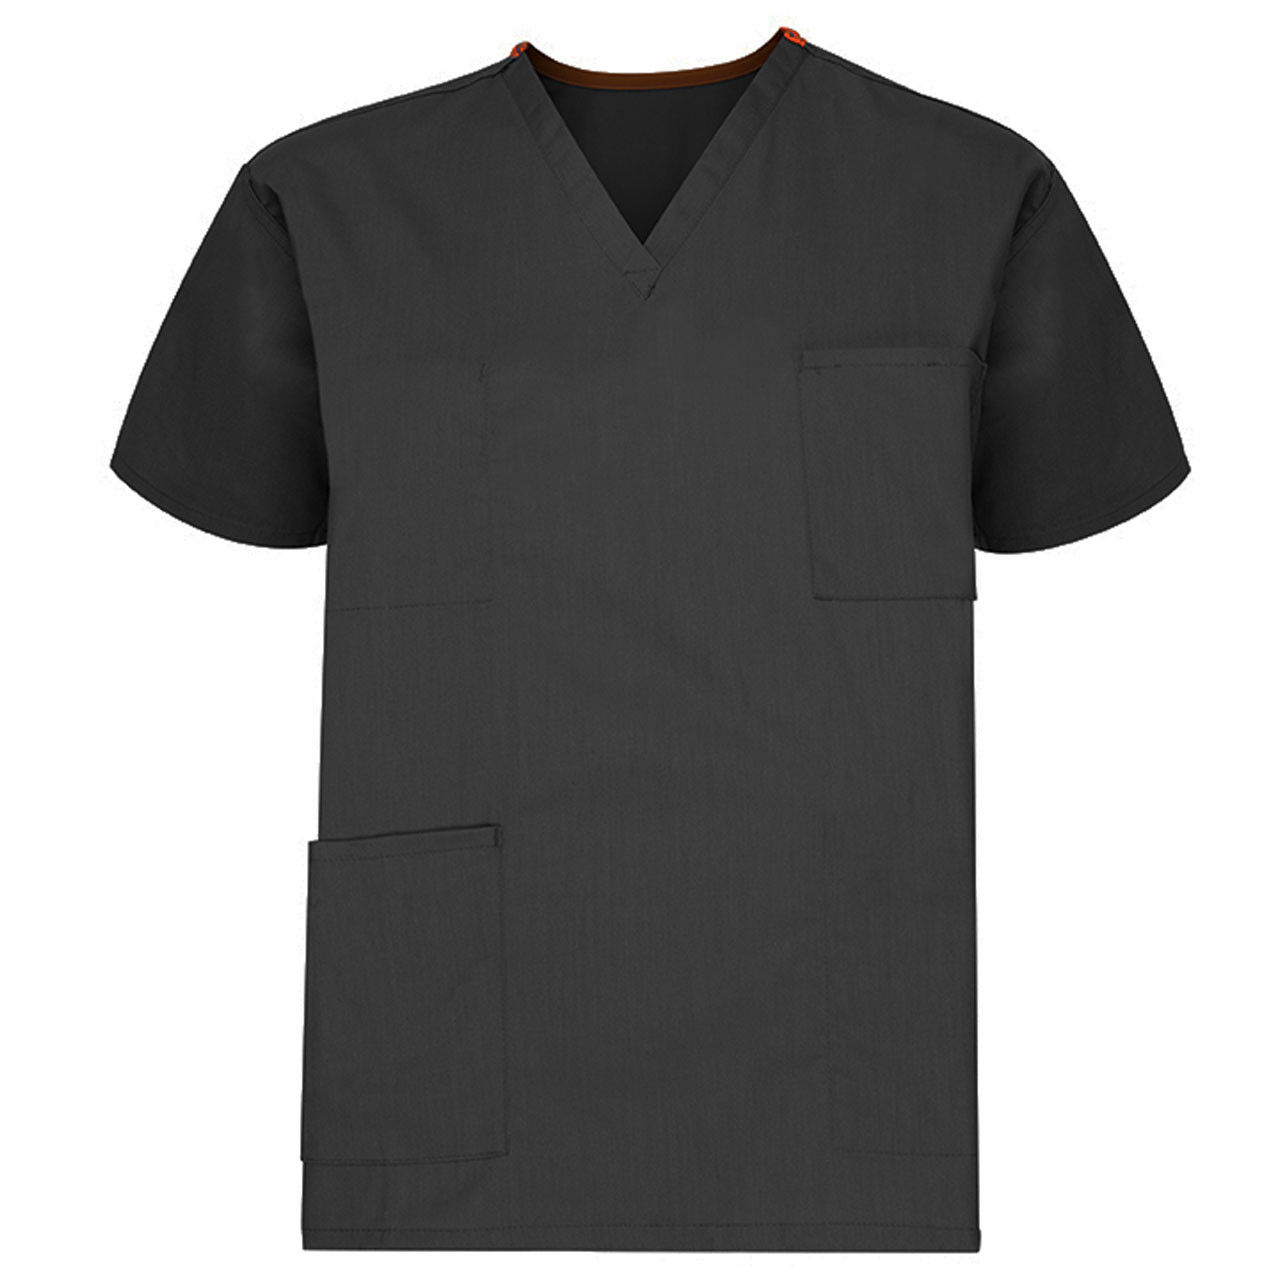 What is the color coding system for the trim of the V-neck on reversible scrubs?